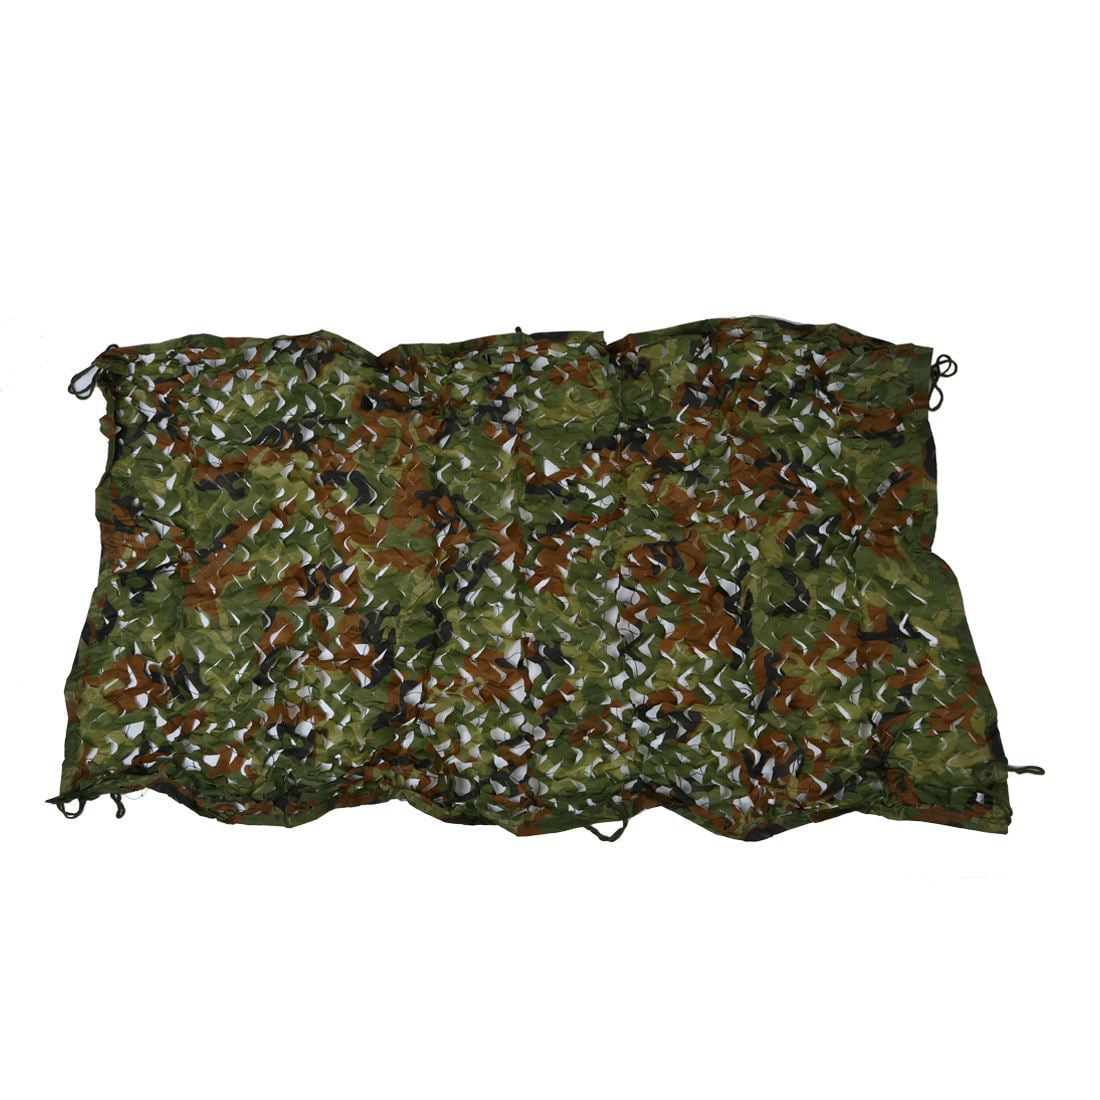 1mx2m 39*78" Woodland Camouflage Camo Net Cover hunting shooting Camping AR Q6U6 